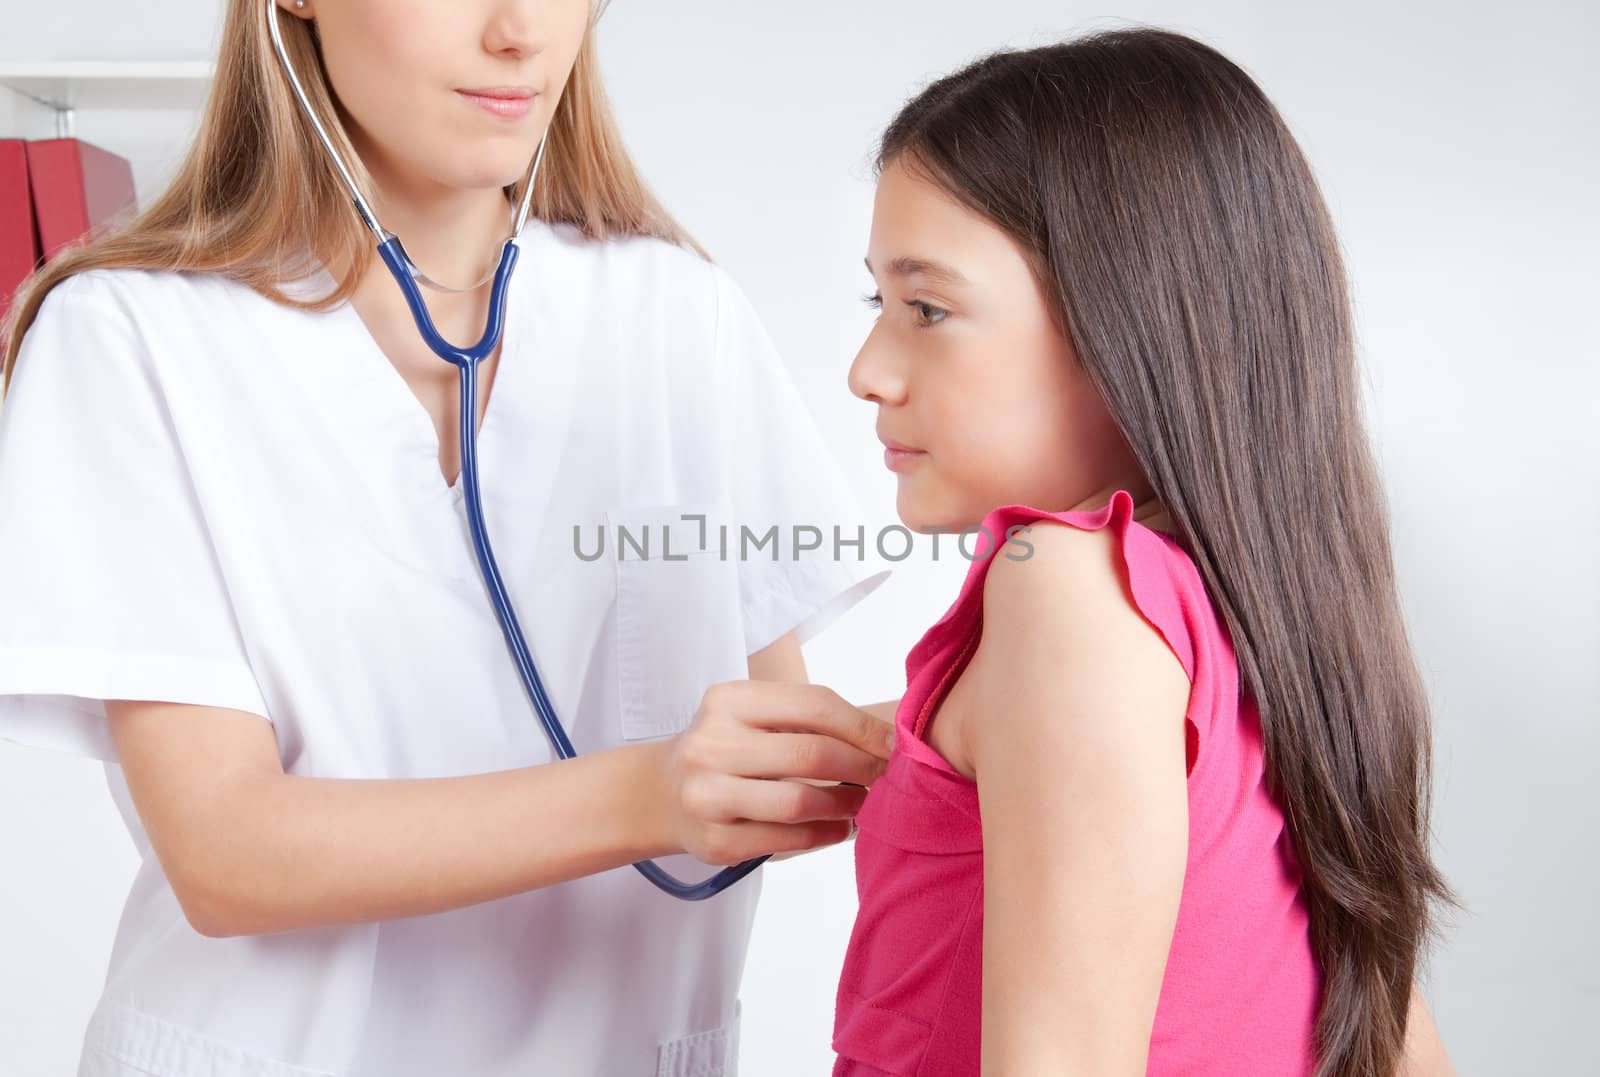 Female doctor examining child patient in clinic.